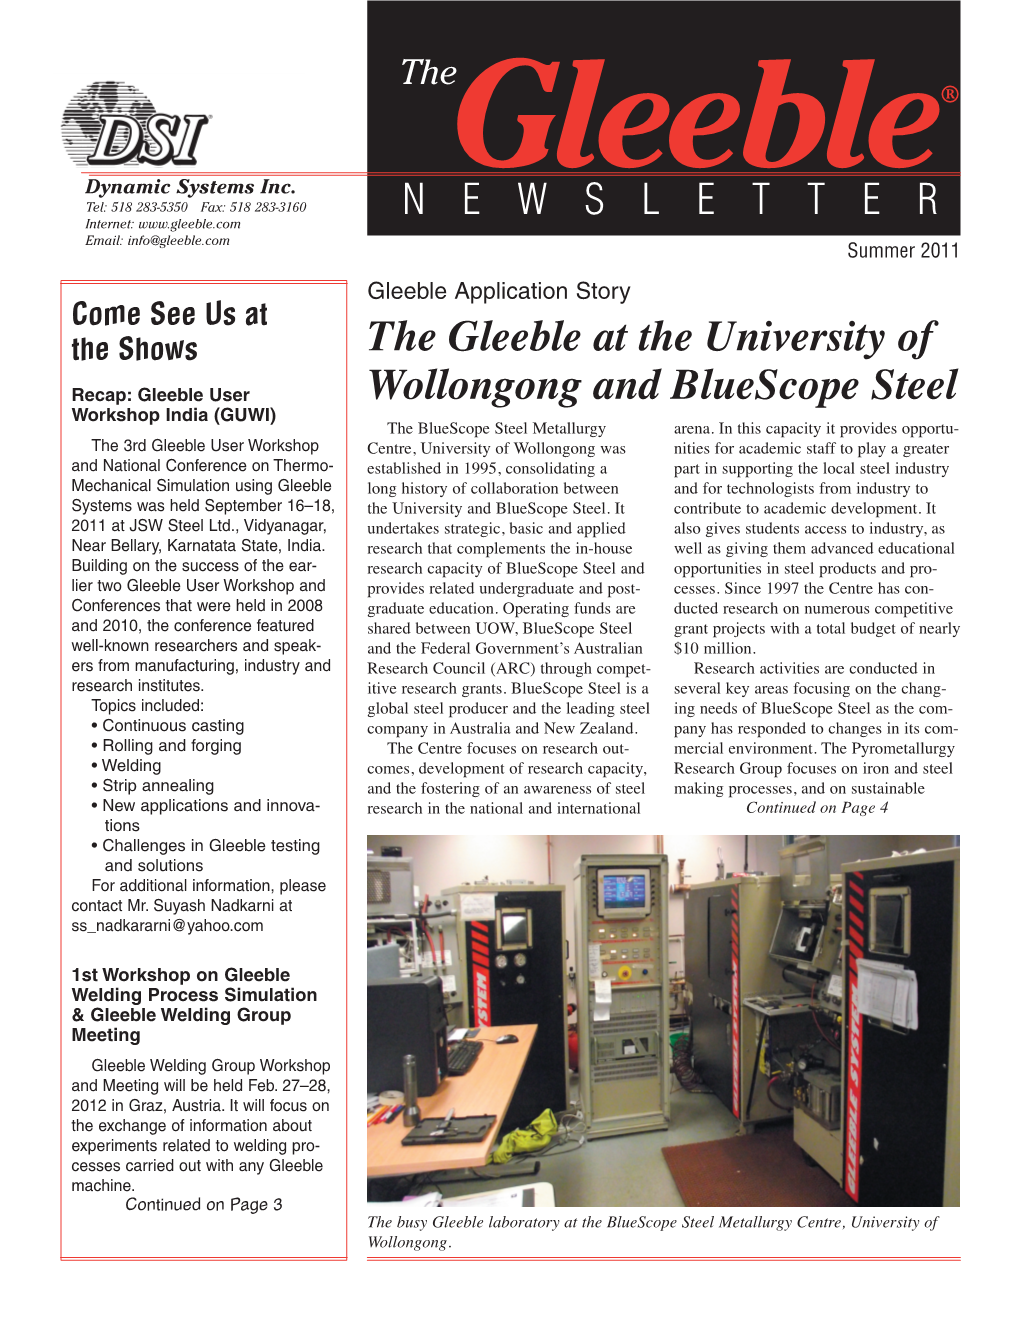 The Gleeble at the University of Wollongong and Bluescope Steel